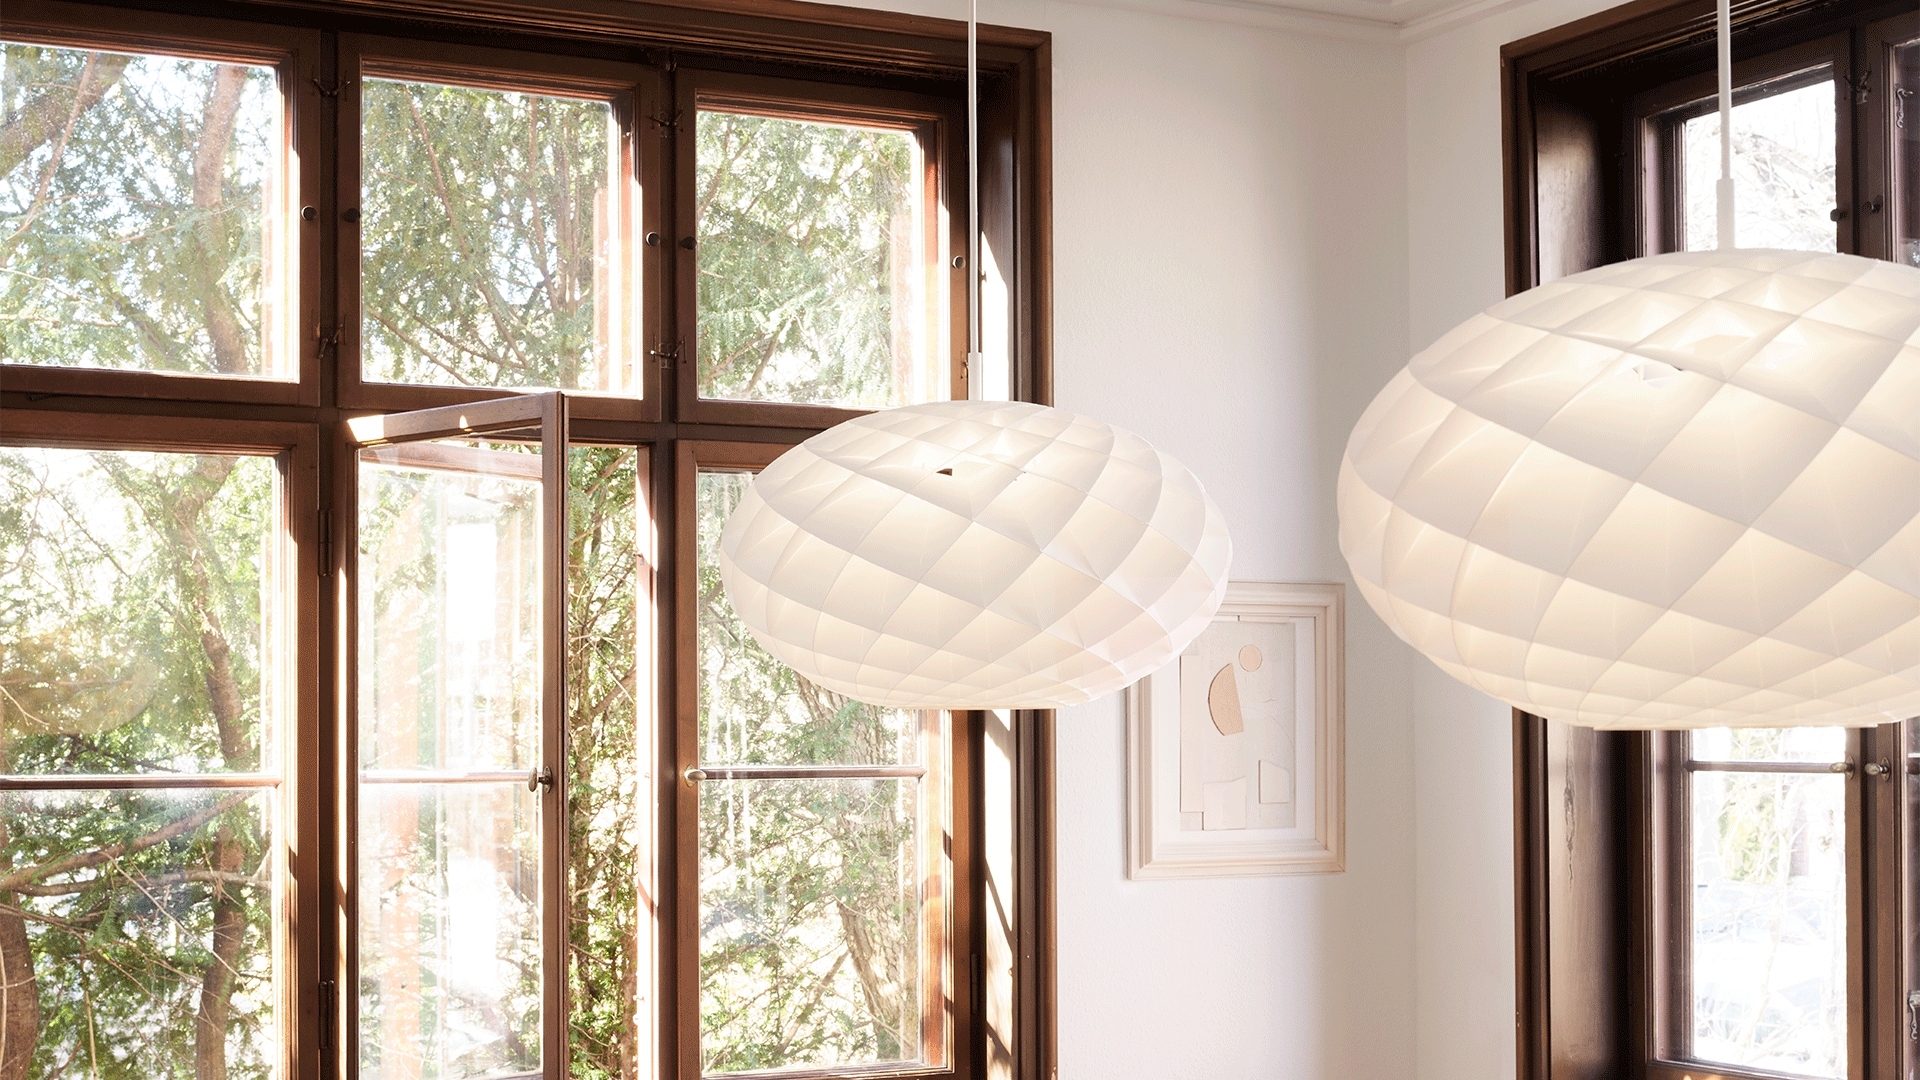 Louis Poulsen Patera Oval Pendants hanging in front of a window